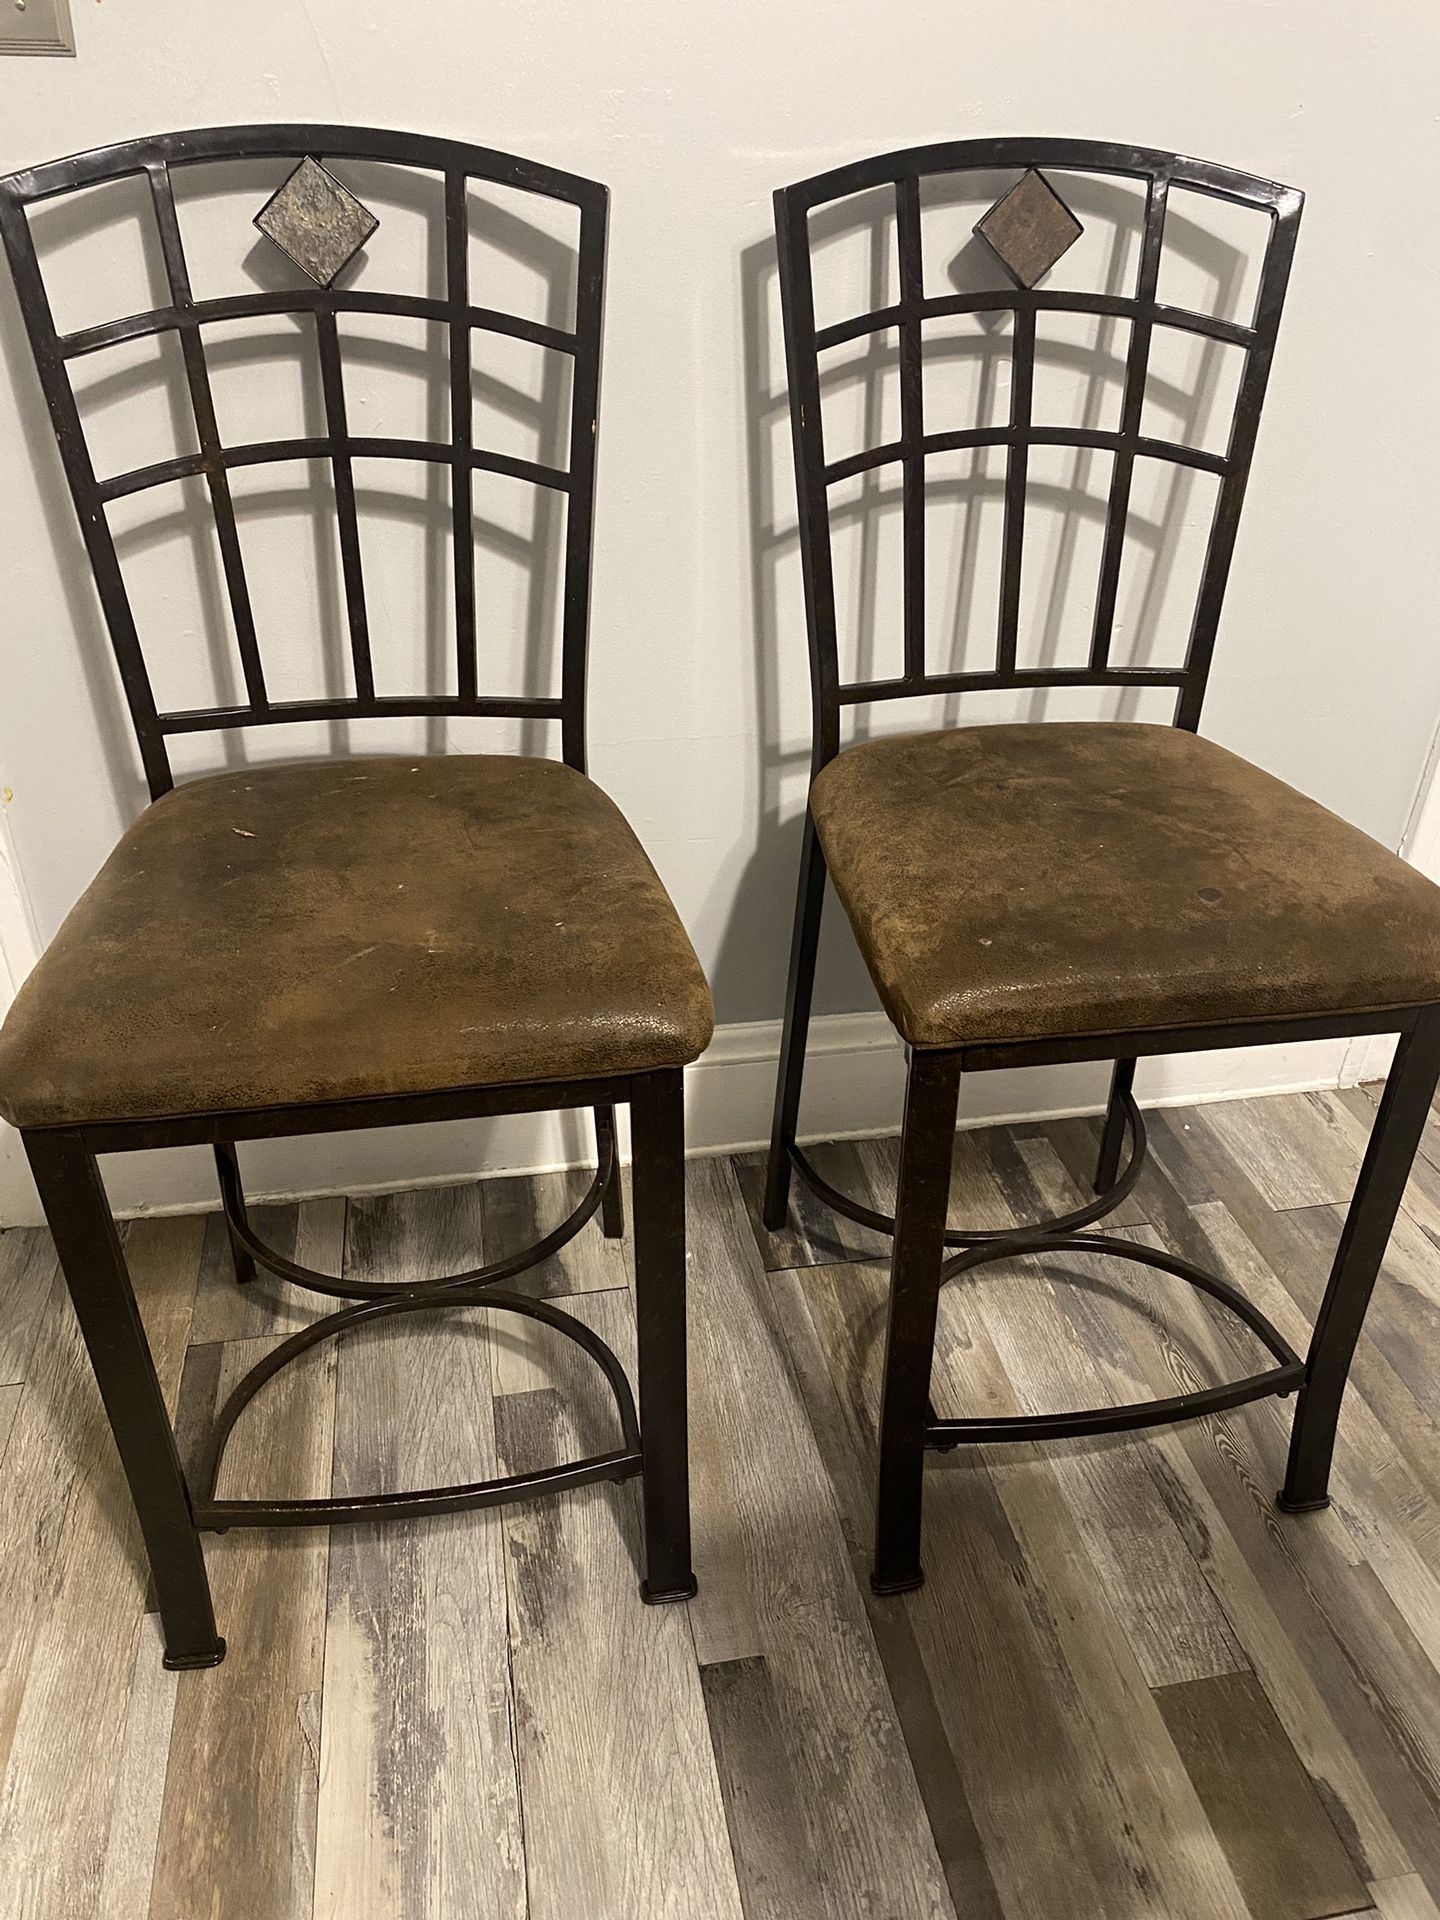 Set Of 2 Counter Height Chairs